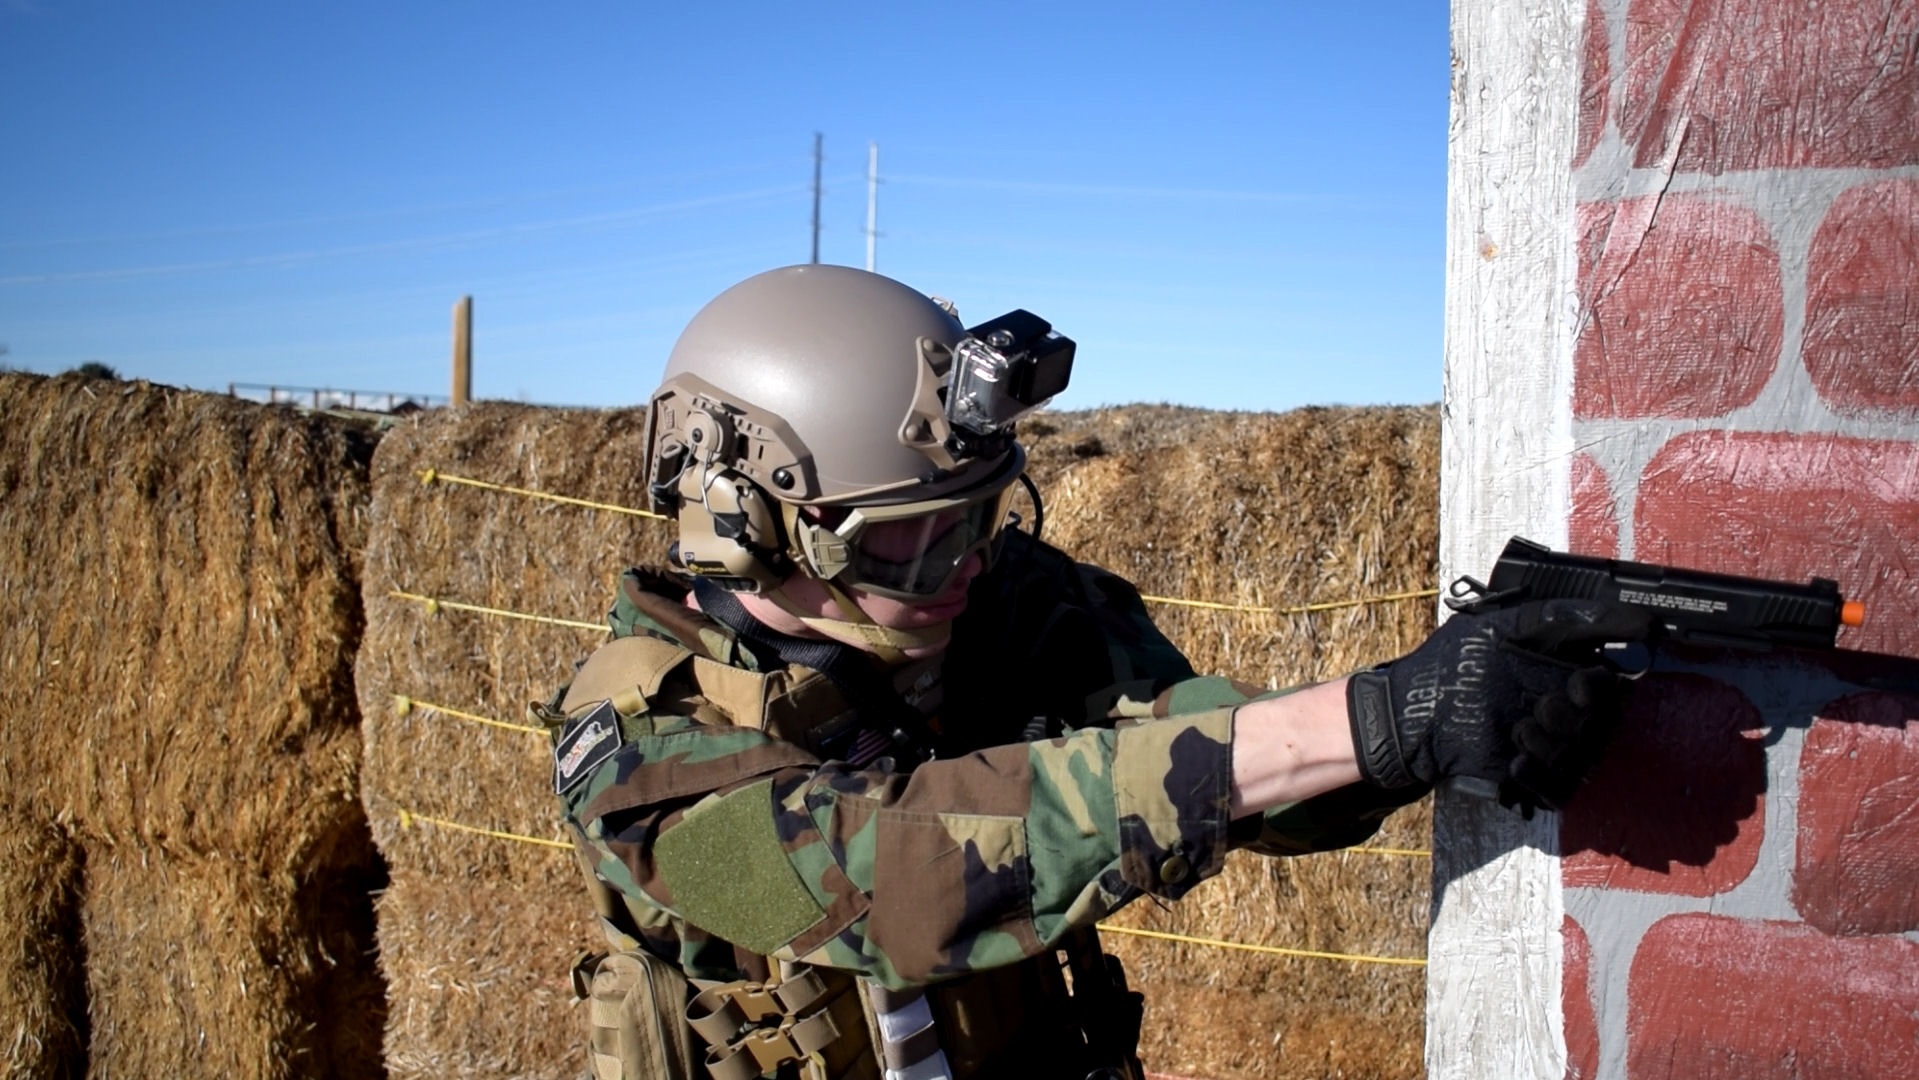 An airsoft player in a camouflage uniform and tactical helmet with a mounted camera, aiming a handgun beside a brick wall with hay bales in the background.